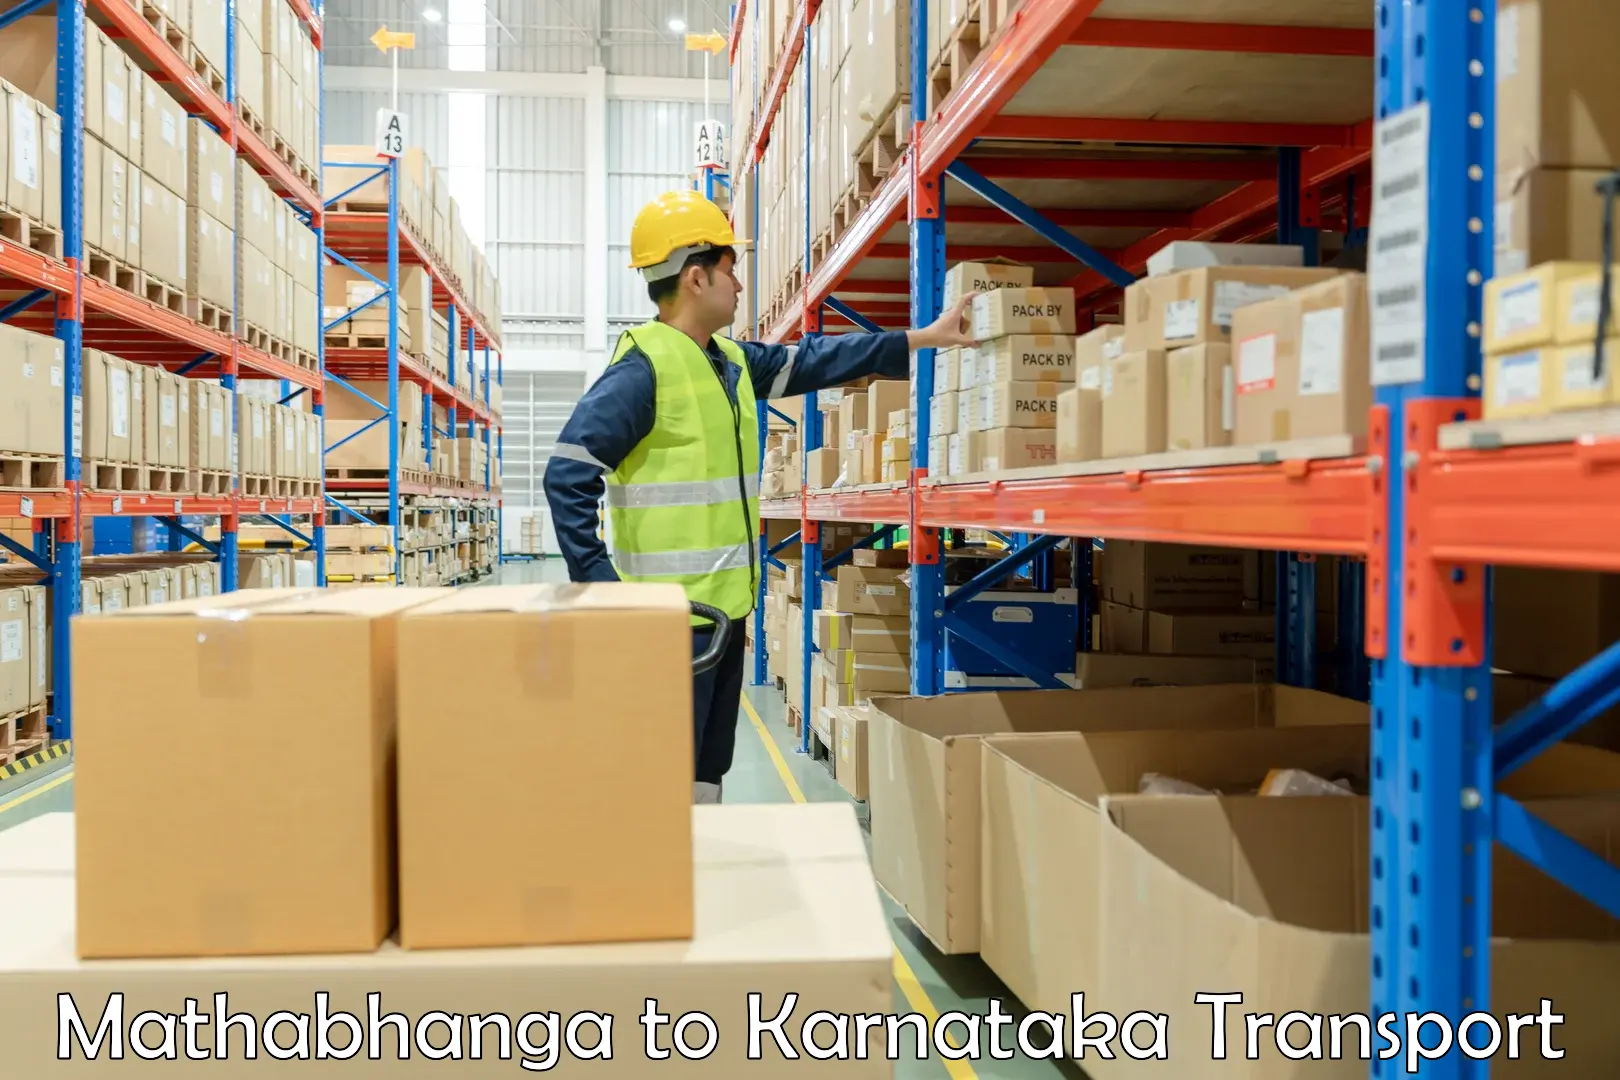 Truck transport companies in India Mathabhanga to Manipal